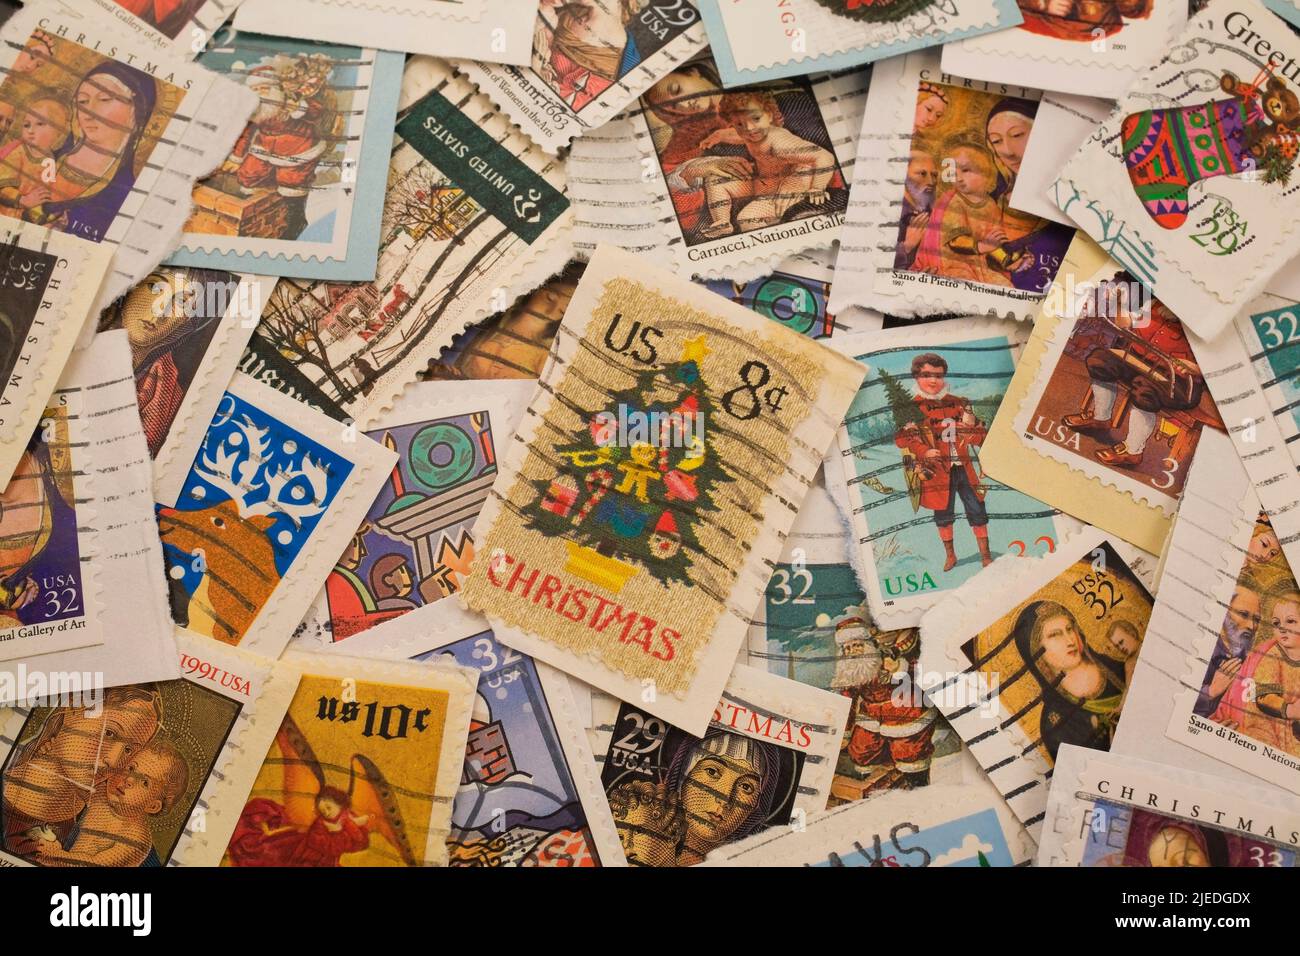 Close-up of old United States postage stamps commemorating Christmas. Stock Photo